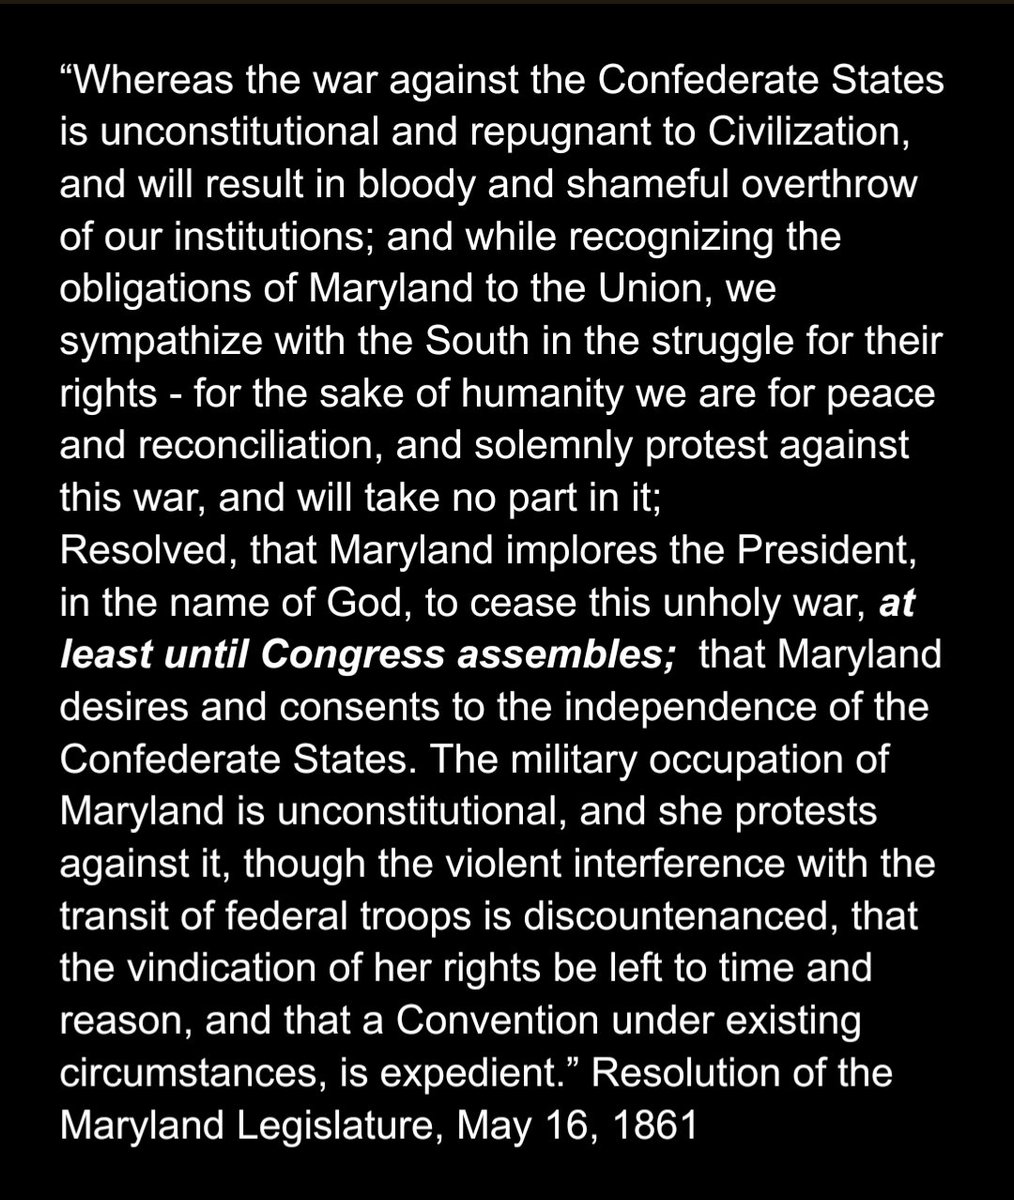 Maryland Legislature Resolution of 1861, imploring Lincoln to stop the 'unholy war.'
#History #AbeLincoln #FridayVibes